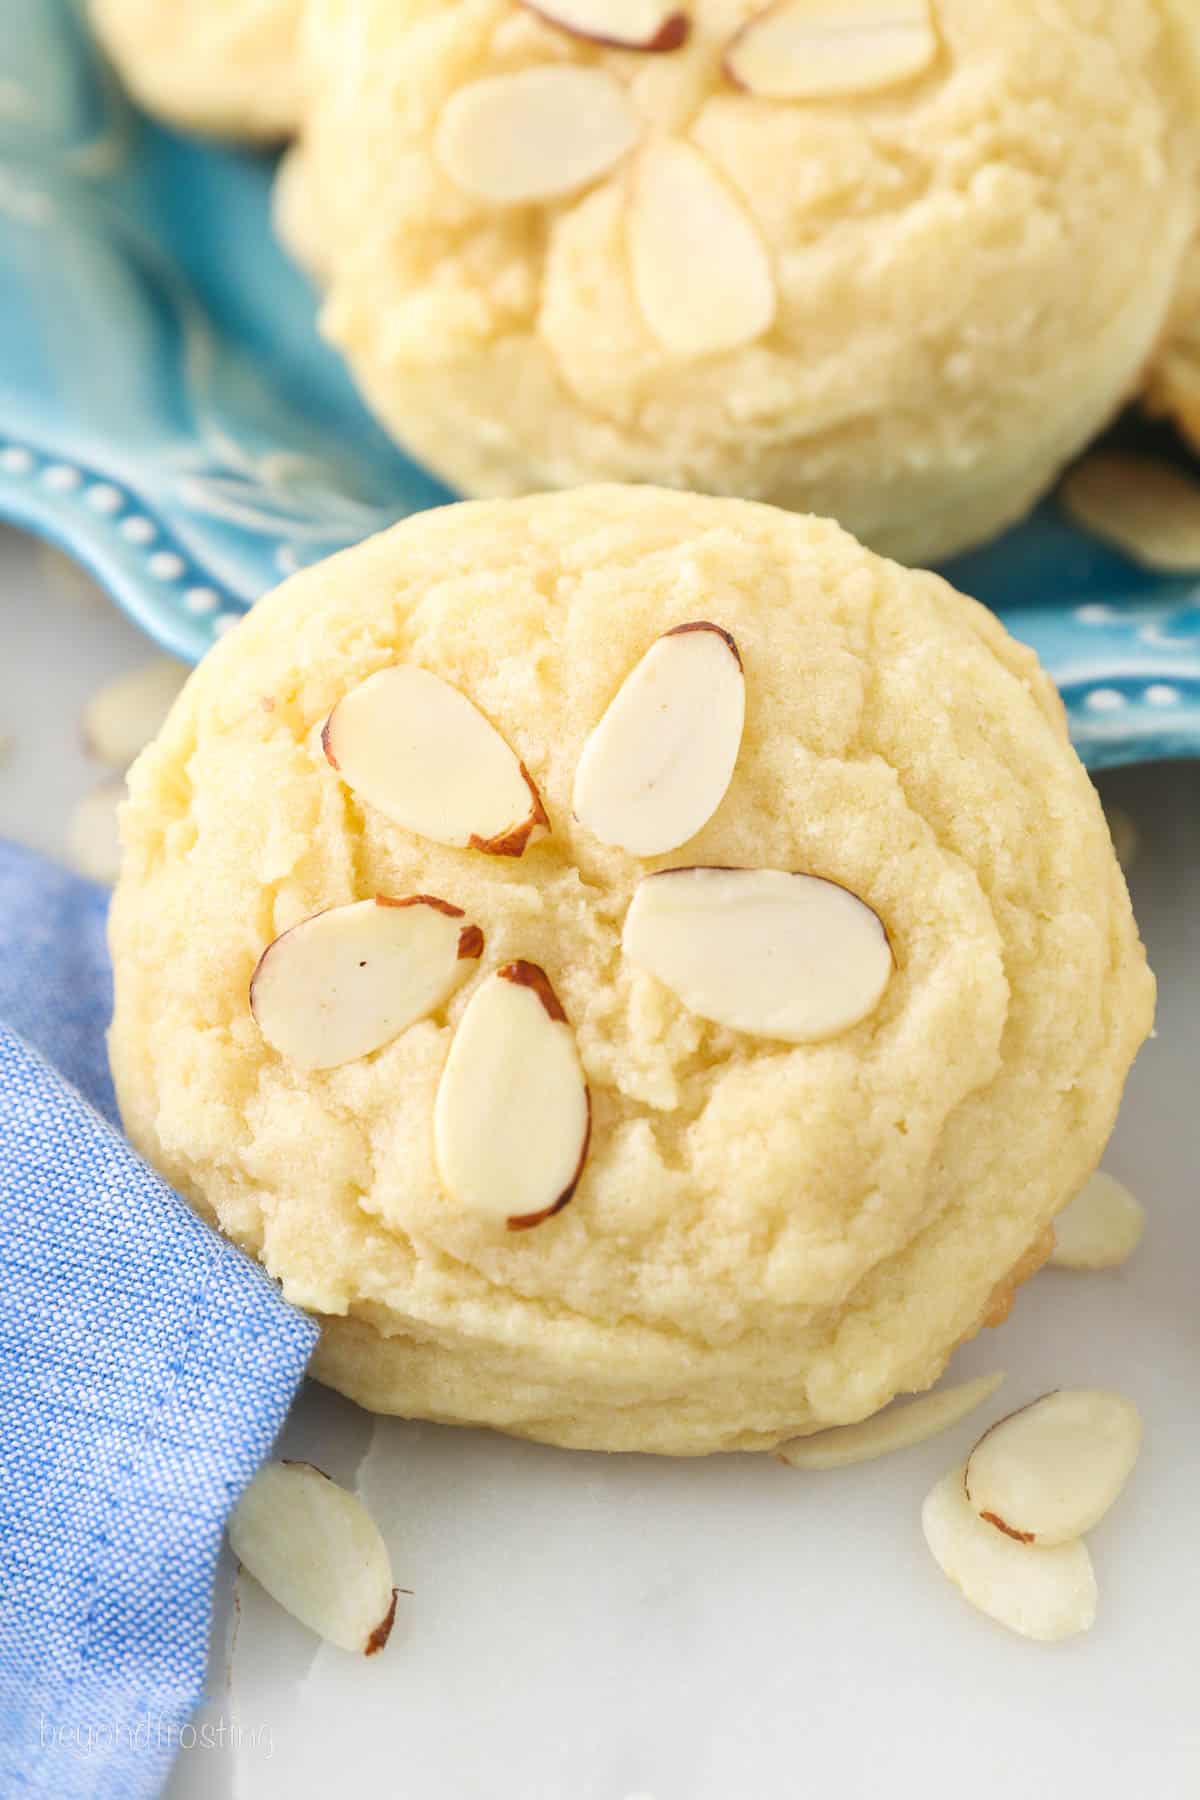 Close up of a almond cookie decorated with sliced almonds, with more cookies on a plate in the background.